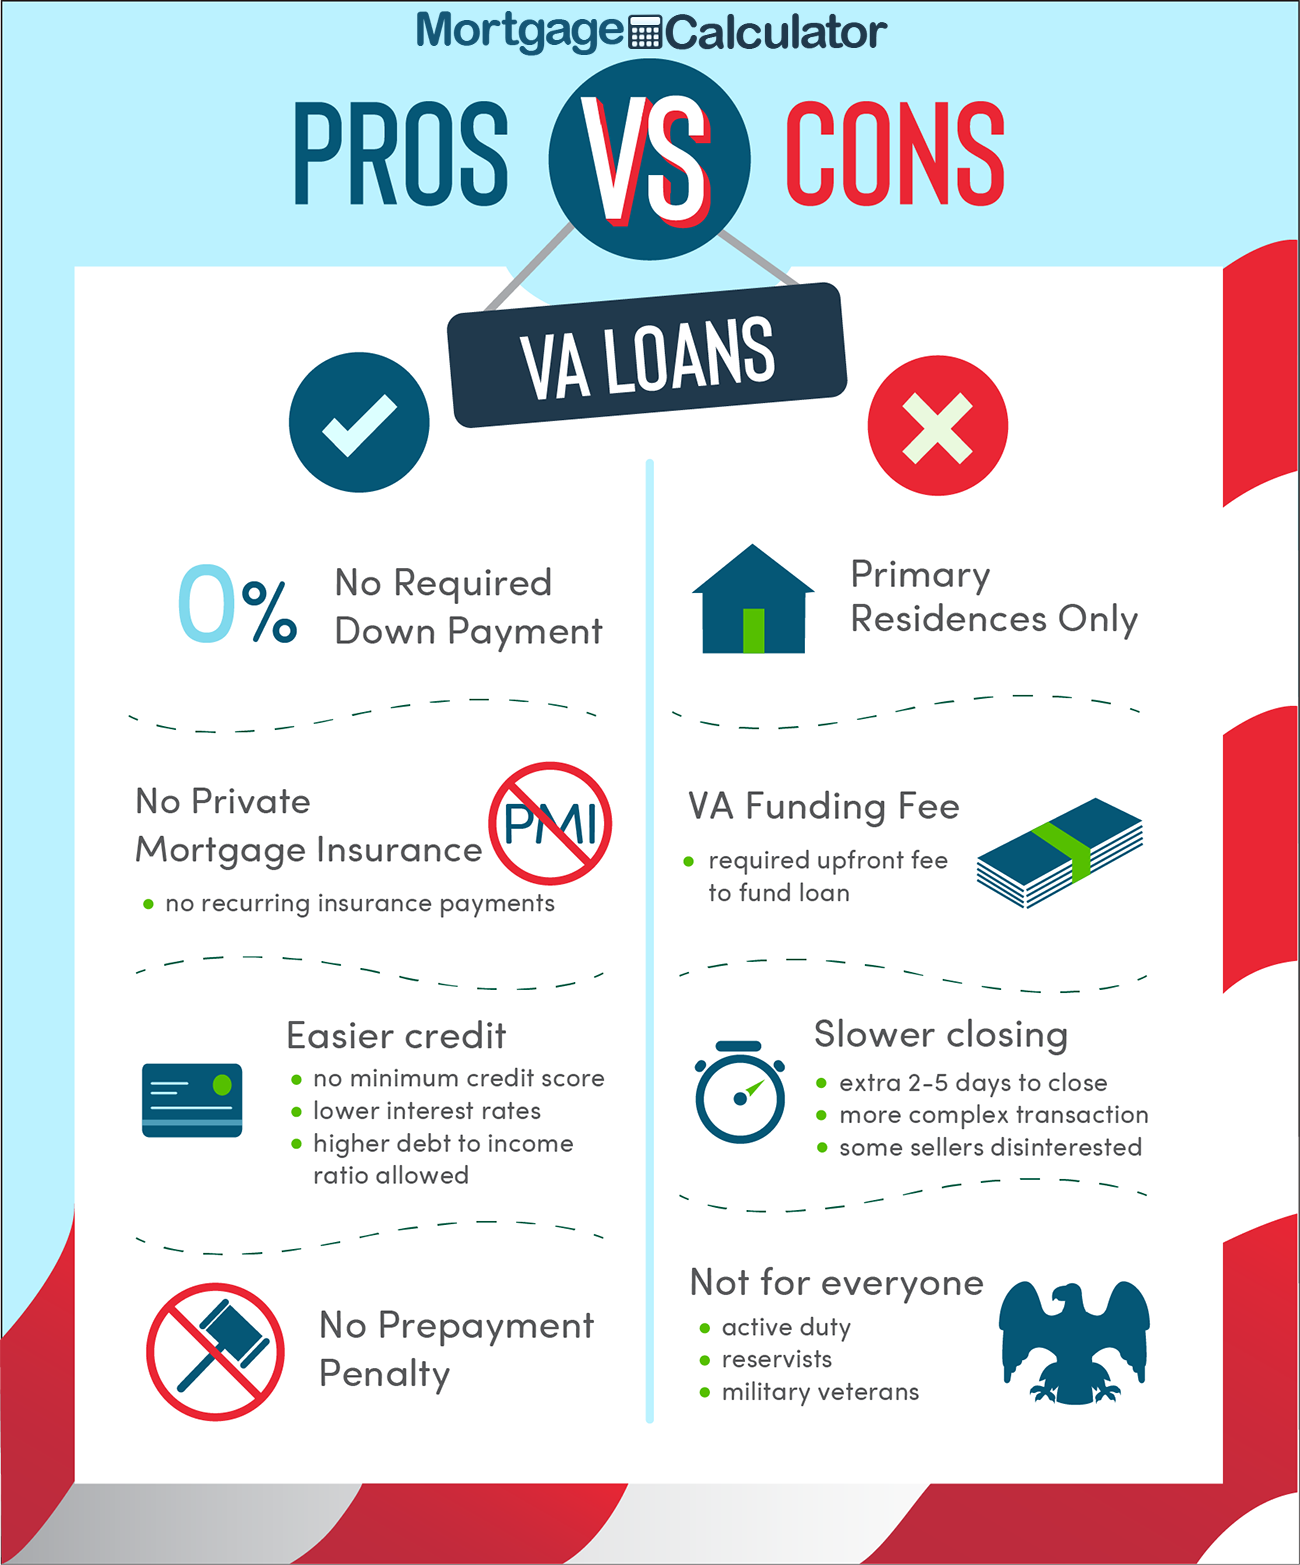 What repairs does VA loan require?